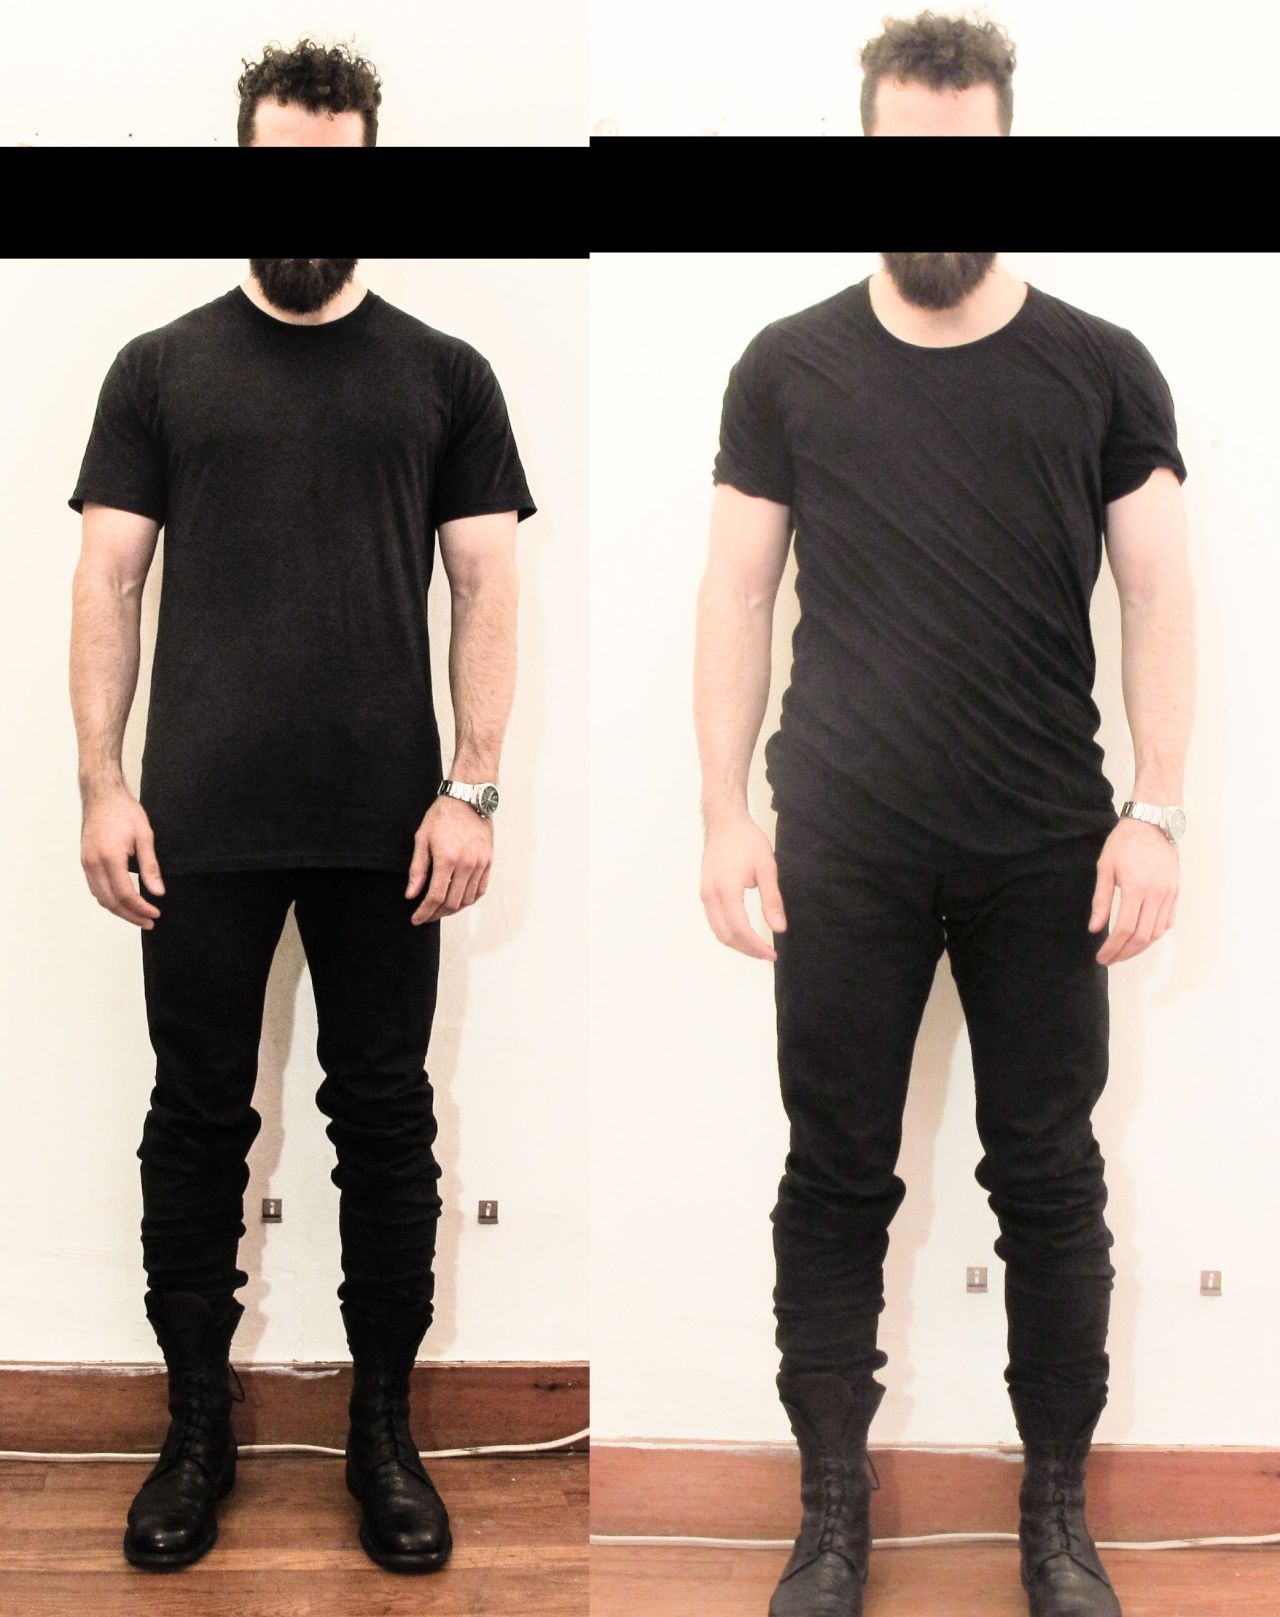 the difference between a $450 black t-shirt from Rick Owens and a $5 black t-shirt from Hanes